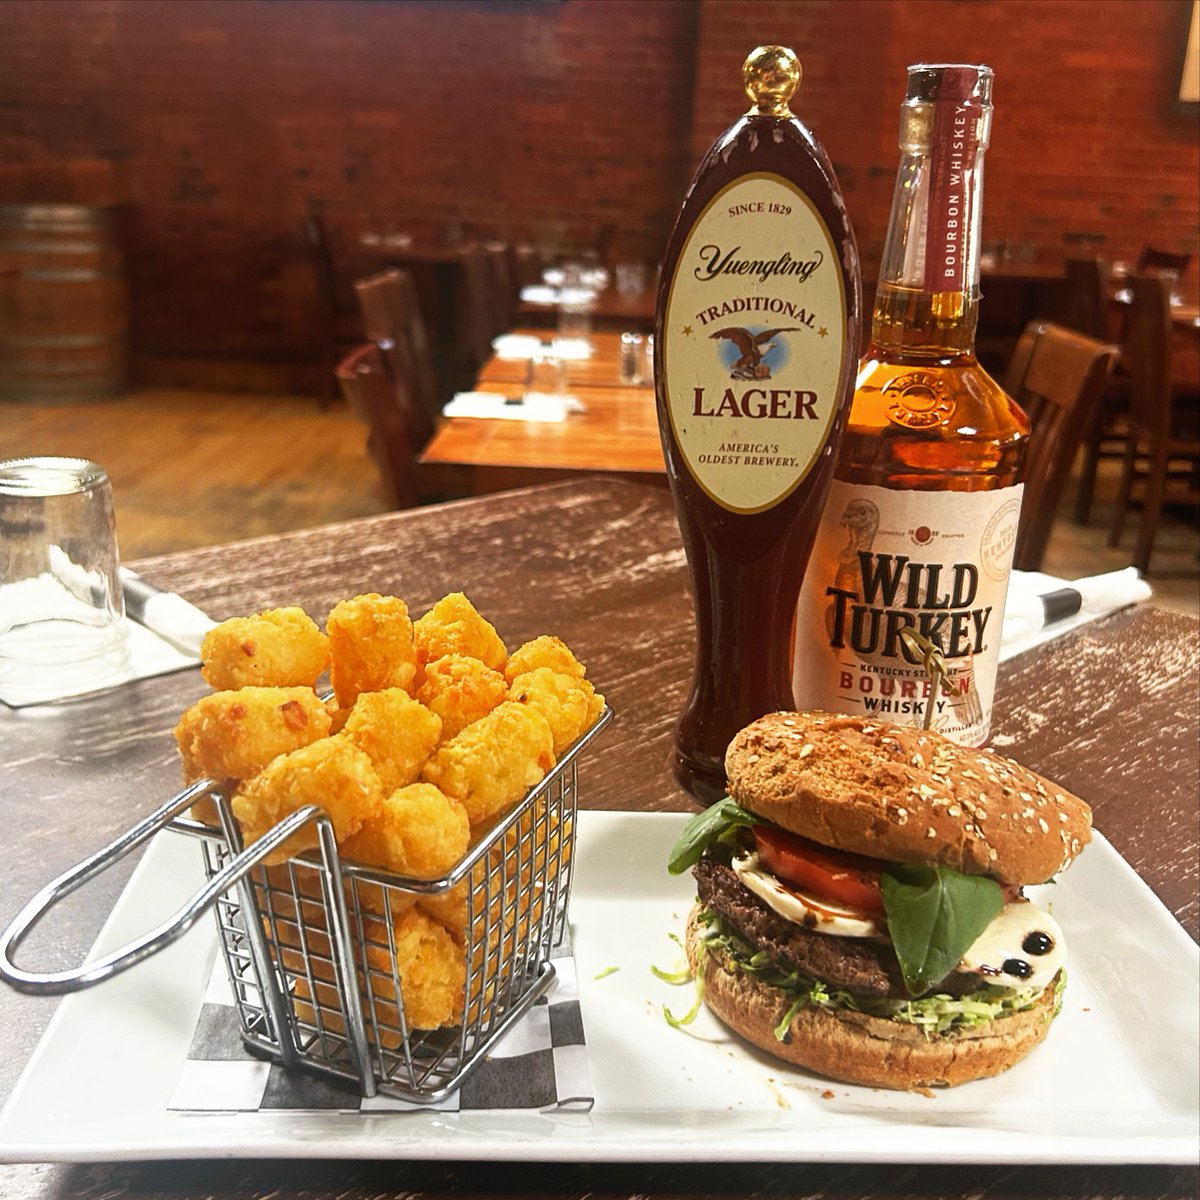 🚨 Every Tuesday… A burger, a beer & a bourbon - all for just $20! Tonight: 🍔 𝐀 𝐁𝐮𝐫𝐠𝐞𝐫 - Fresh Mozzarella, Marinated Tomato, Basil Pesto, Shaved Brussels Sprouts, Balsamic Glaze 🍺 𝐀 𝐁𝐞𝐞𝐫 - Yuengling Lager 🥃 𝐀 𝐁𝐨𝐮𝐫𝐛𝐨𝐧 - Wild Turkey #urbansaloon